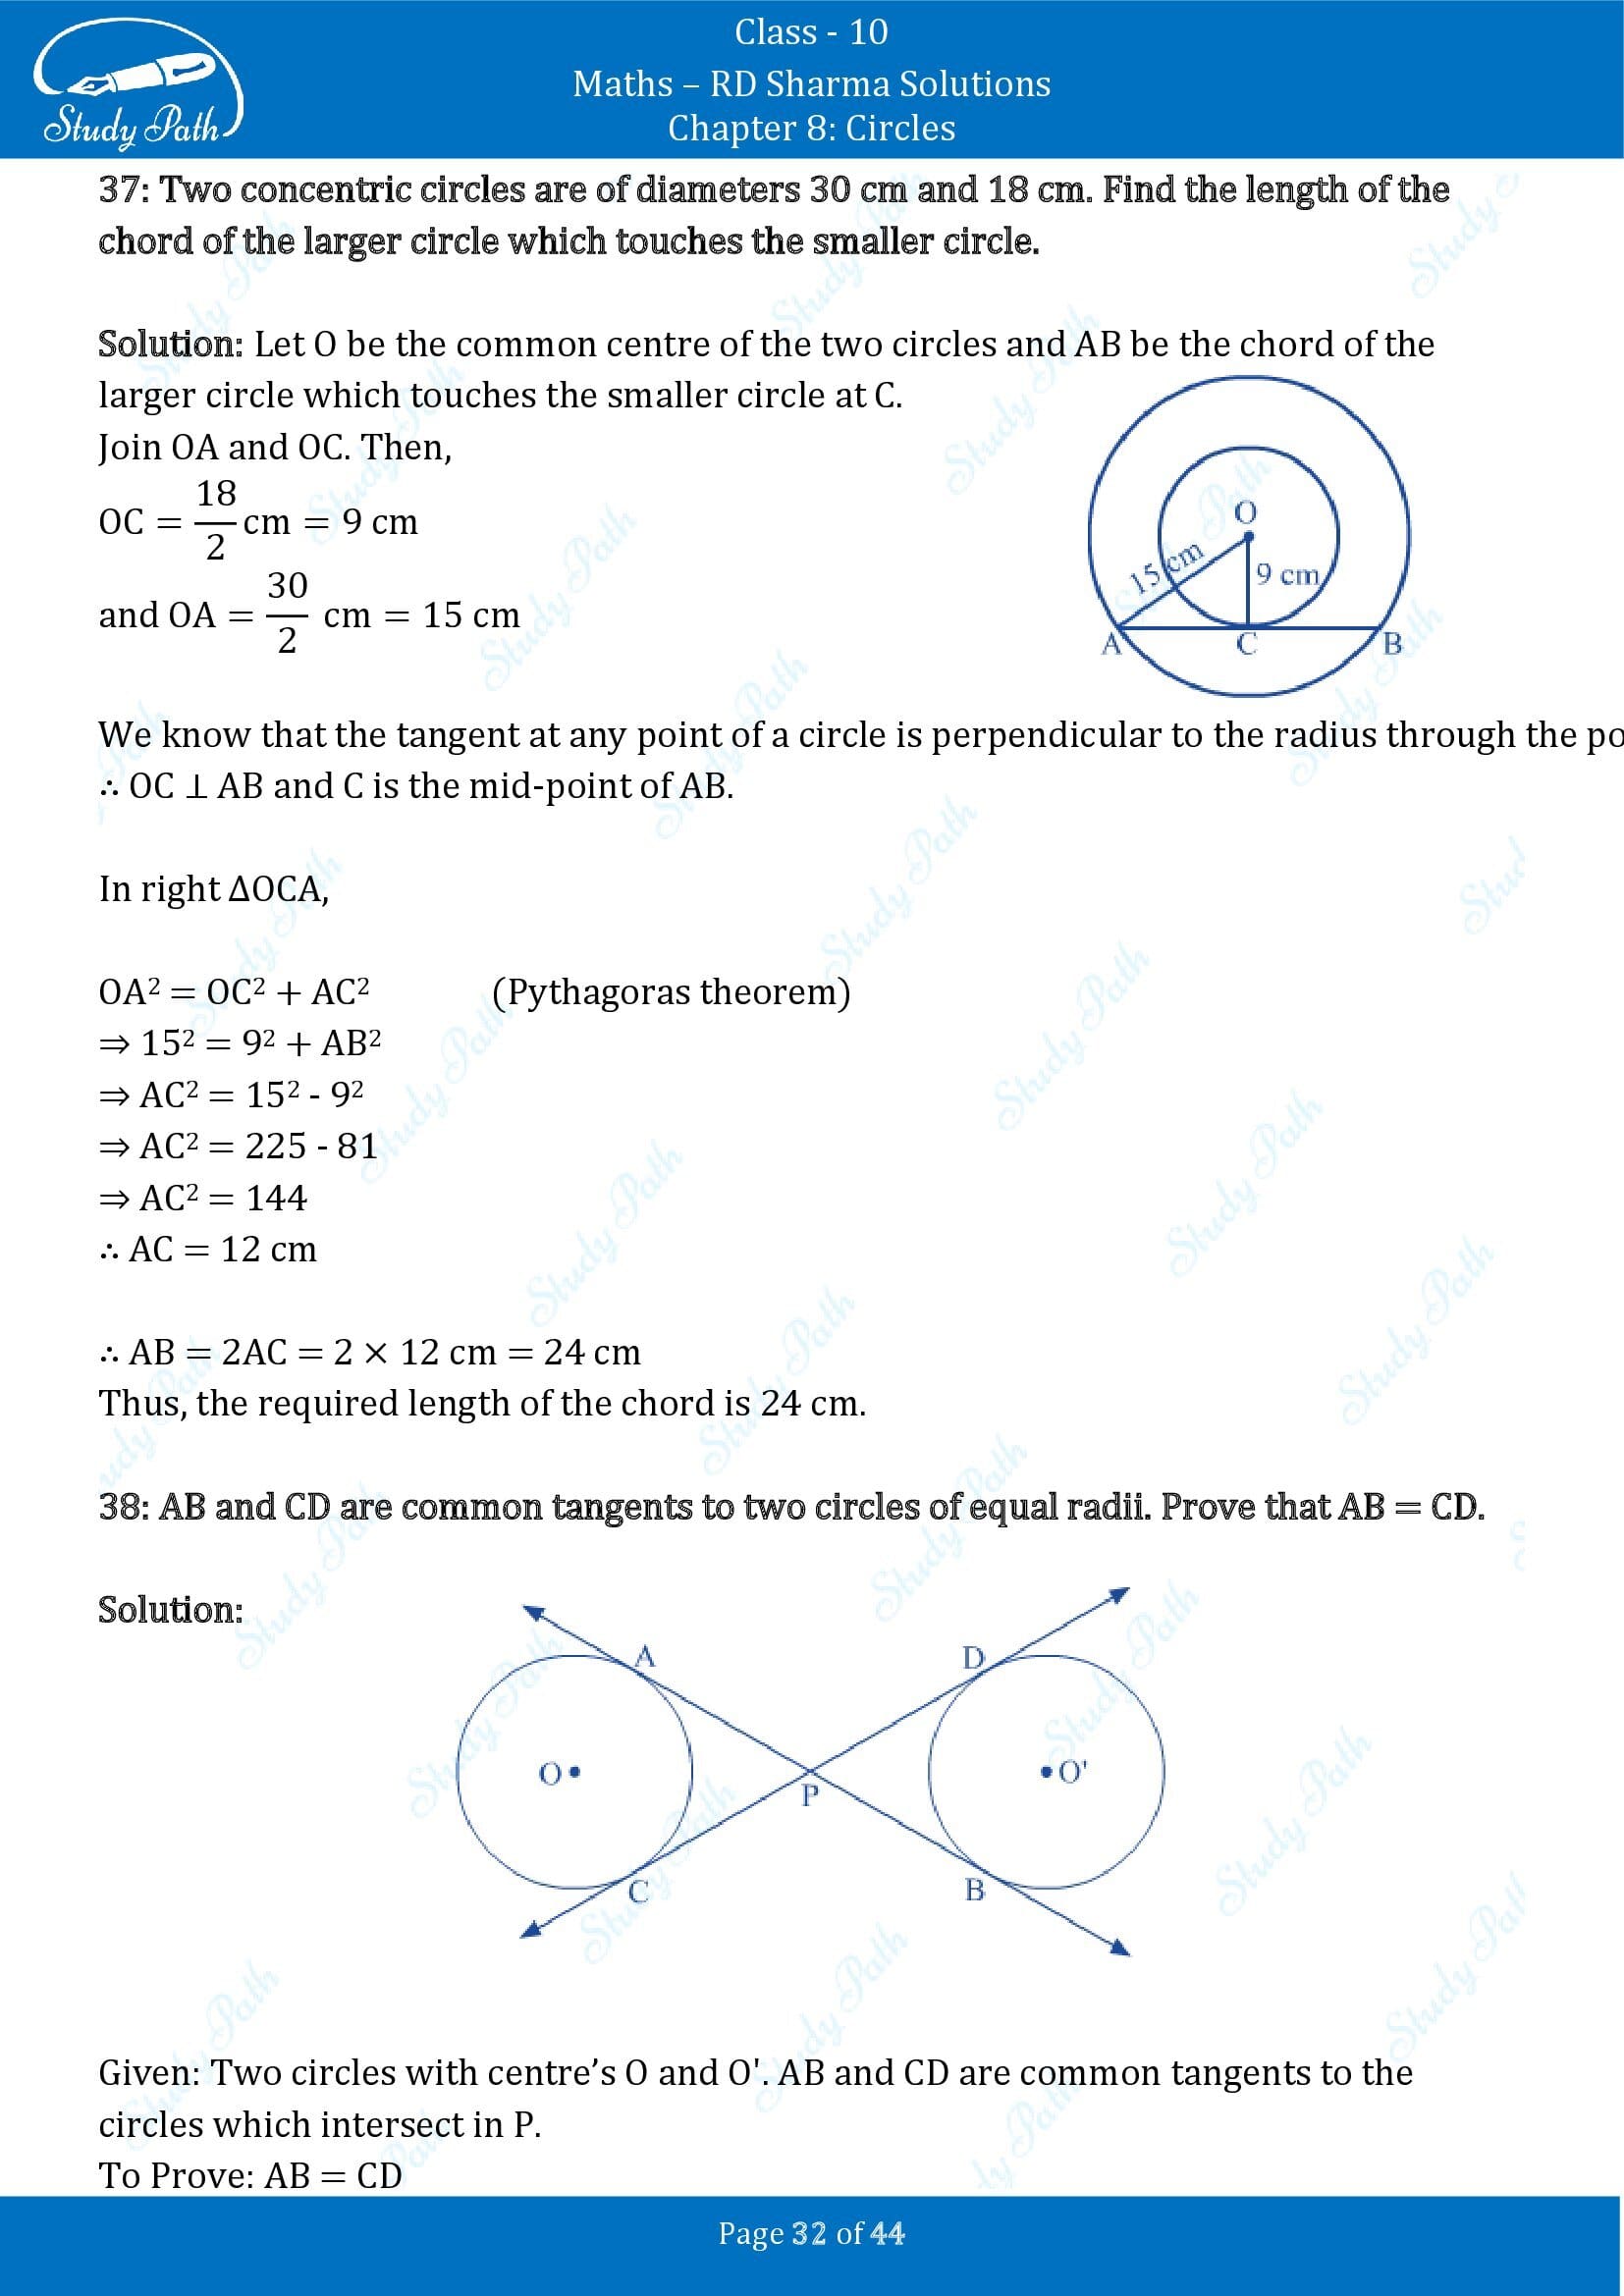 RD Sharma Solutions Class 10 Chapter 8 Circles Exercise 8.2 00032